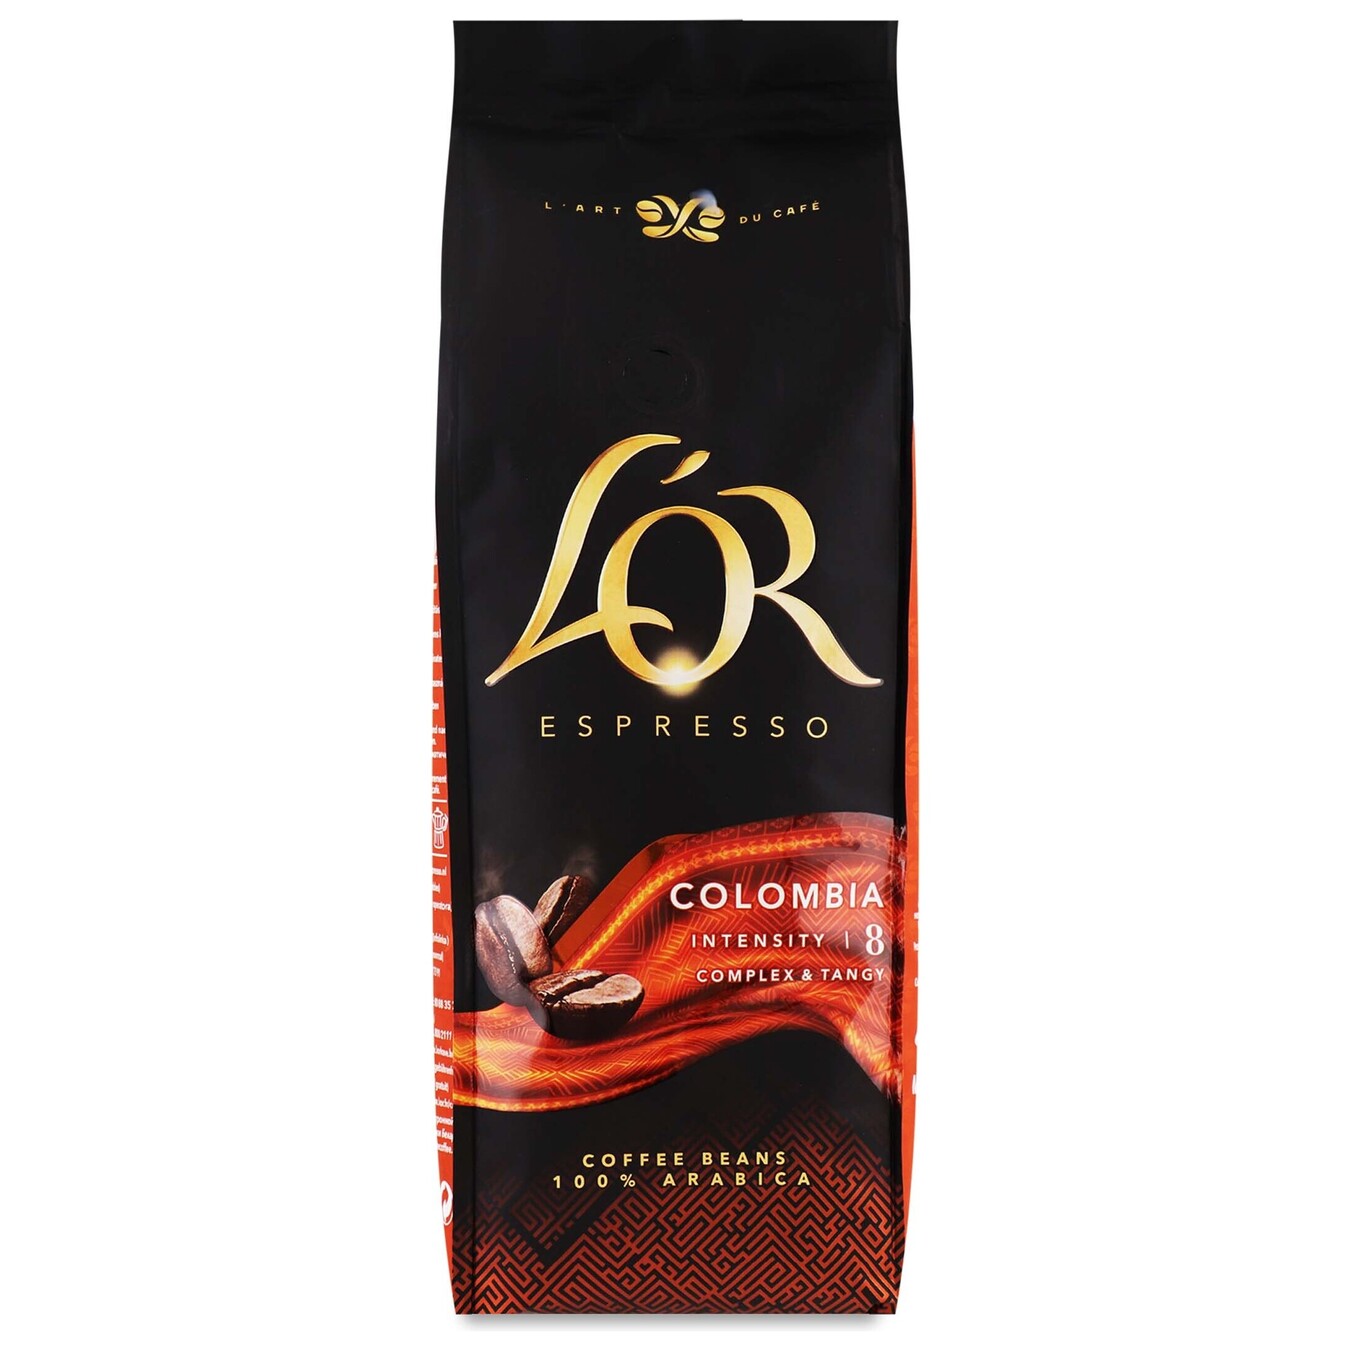 L'or Espresso Colombia Coffee Beans 500g